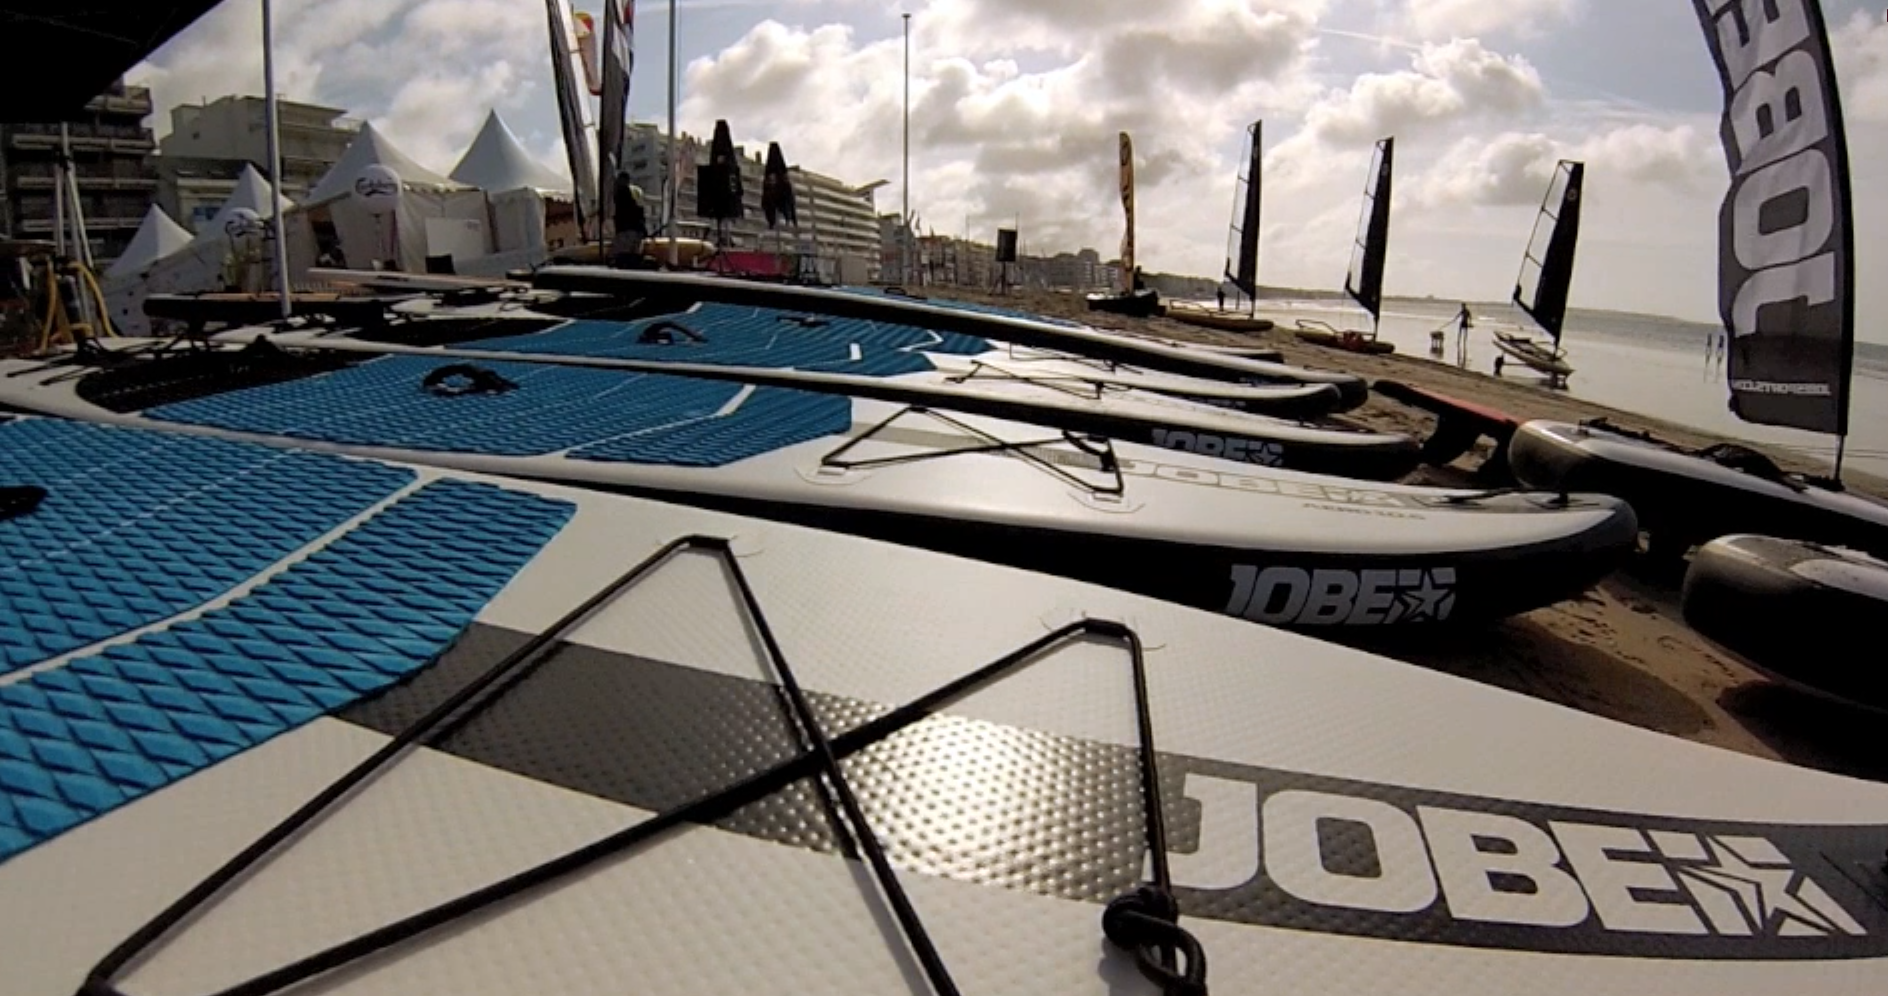 Aftermovie of the Jobe SUP Summer Cup 2015 in France!